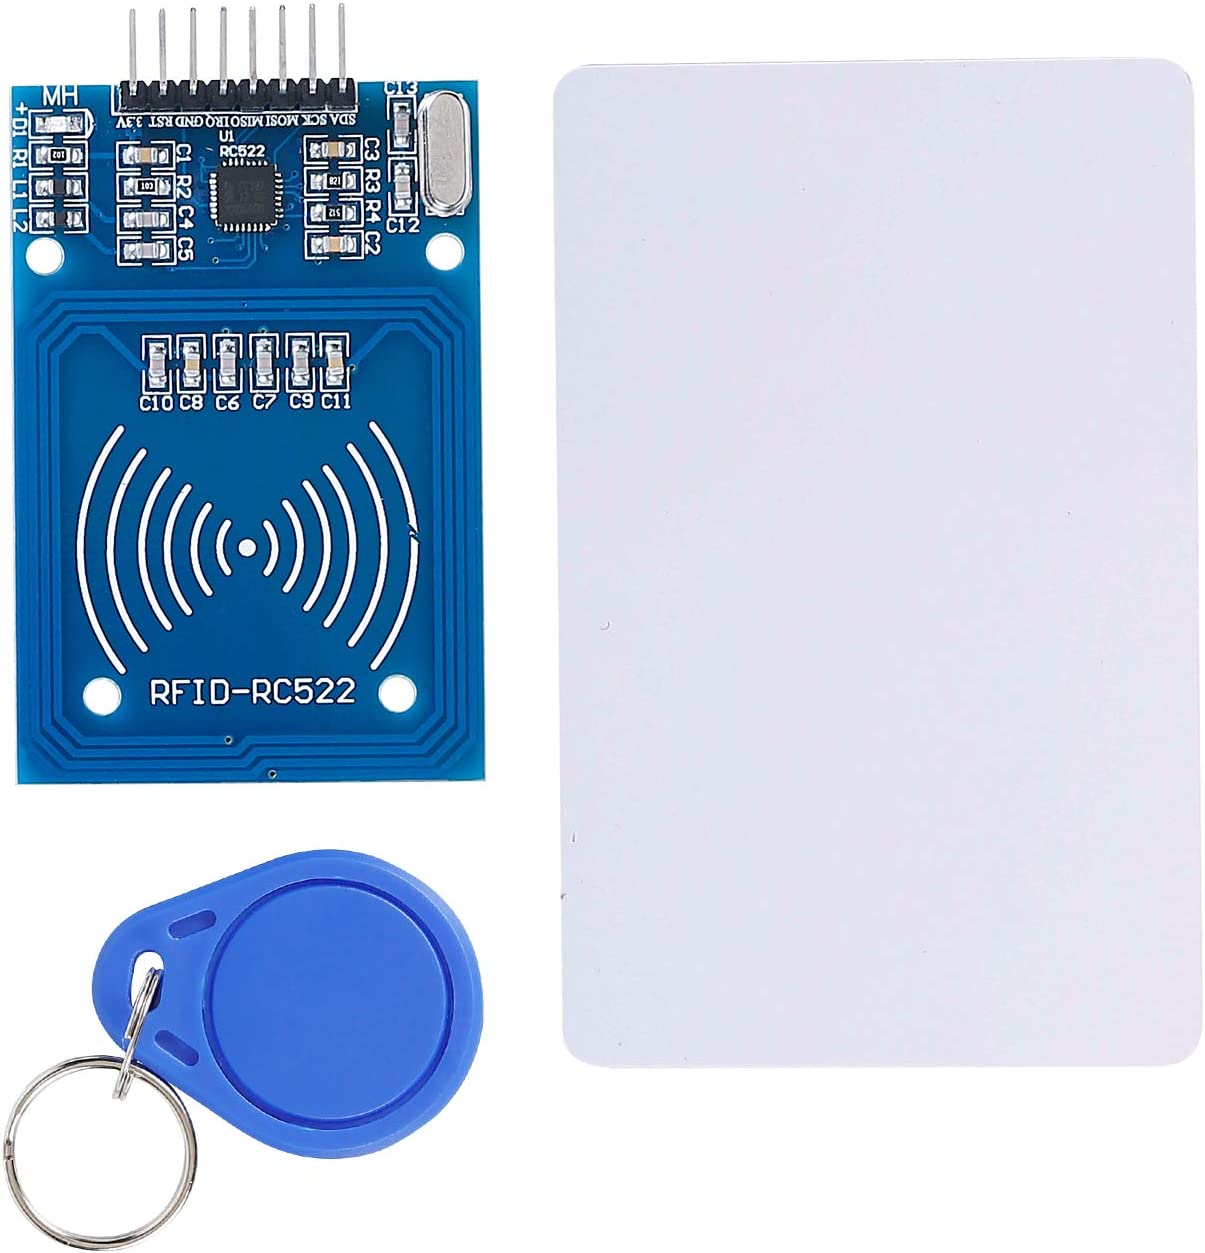 SunFounder Reader Module Kit Mifare RC522 Reader Module with S50 White Card and Key Ring Compatible with Arduino Raspberry Pi